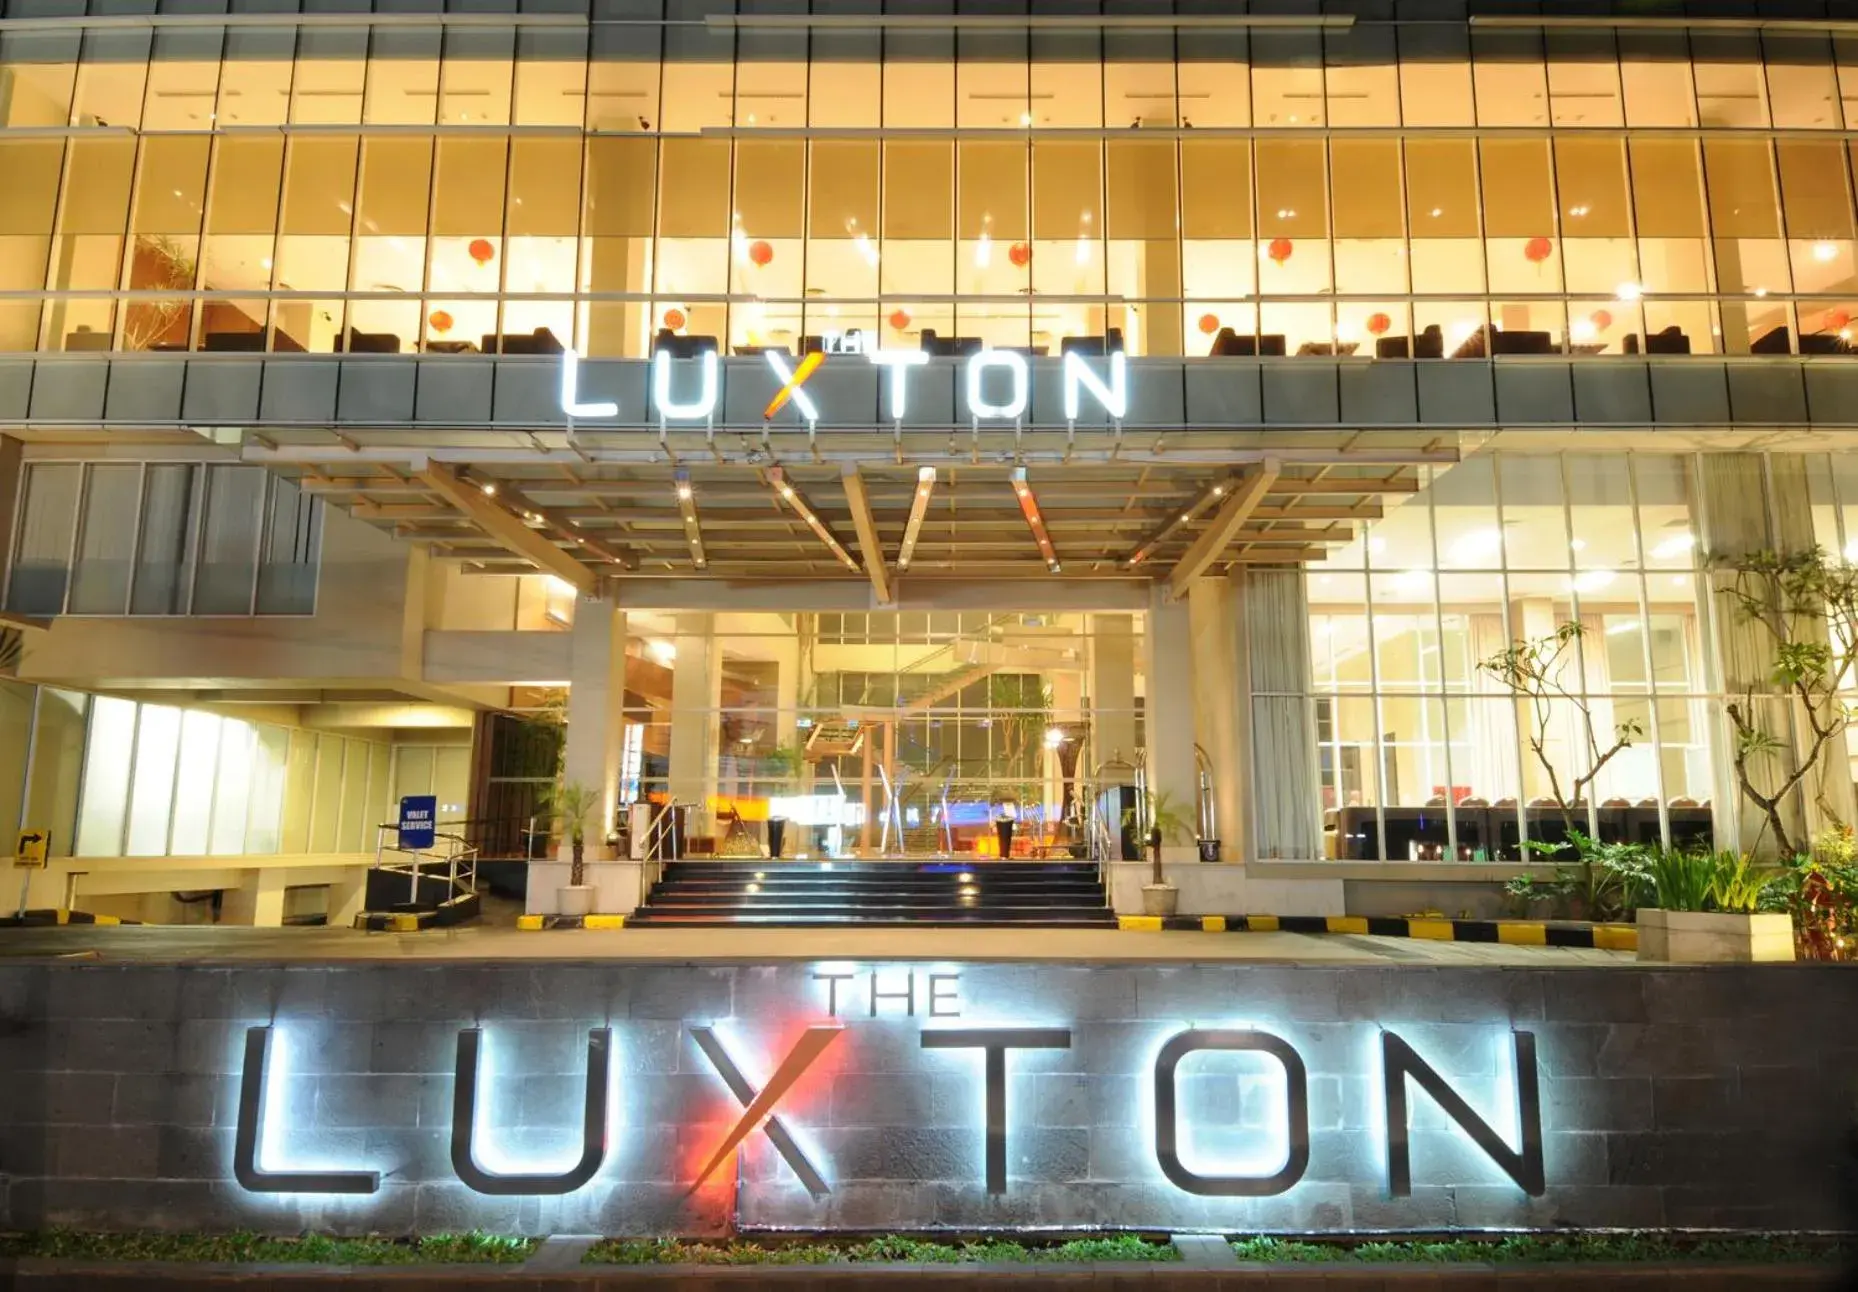 Property building in The Luxton Bandung